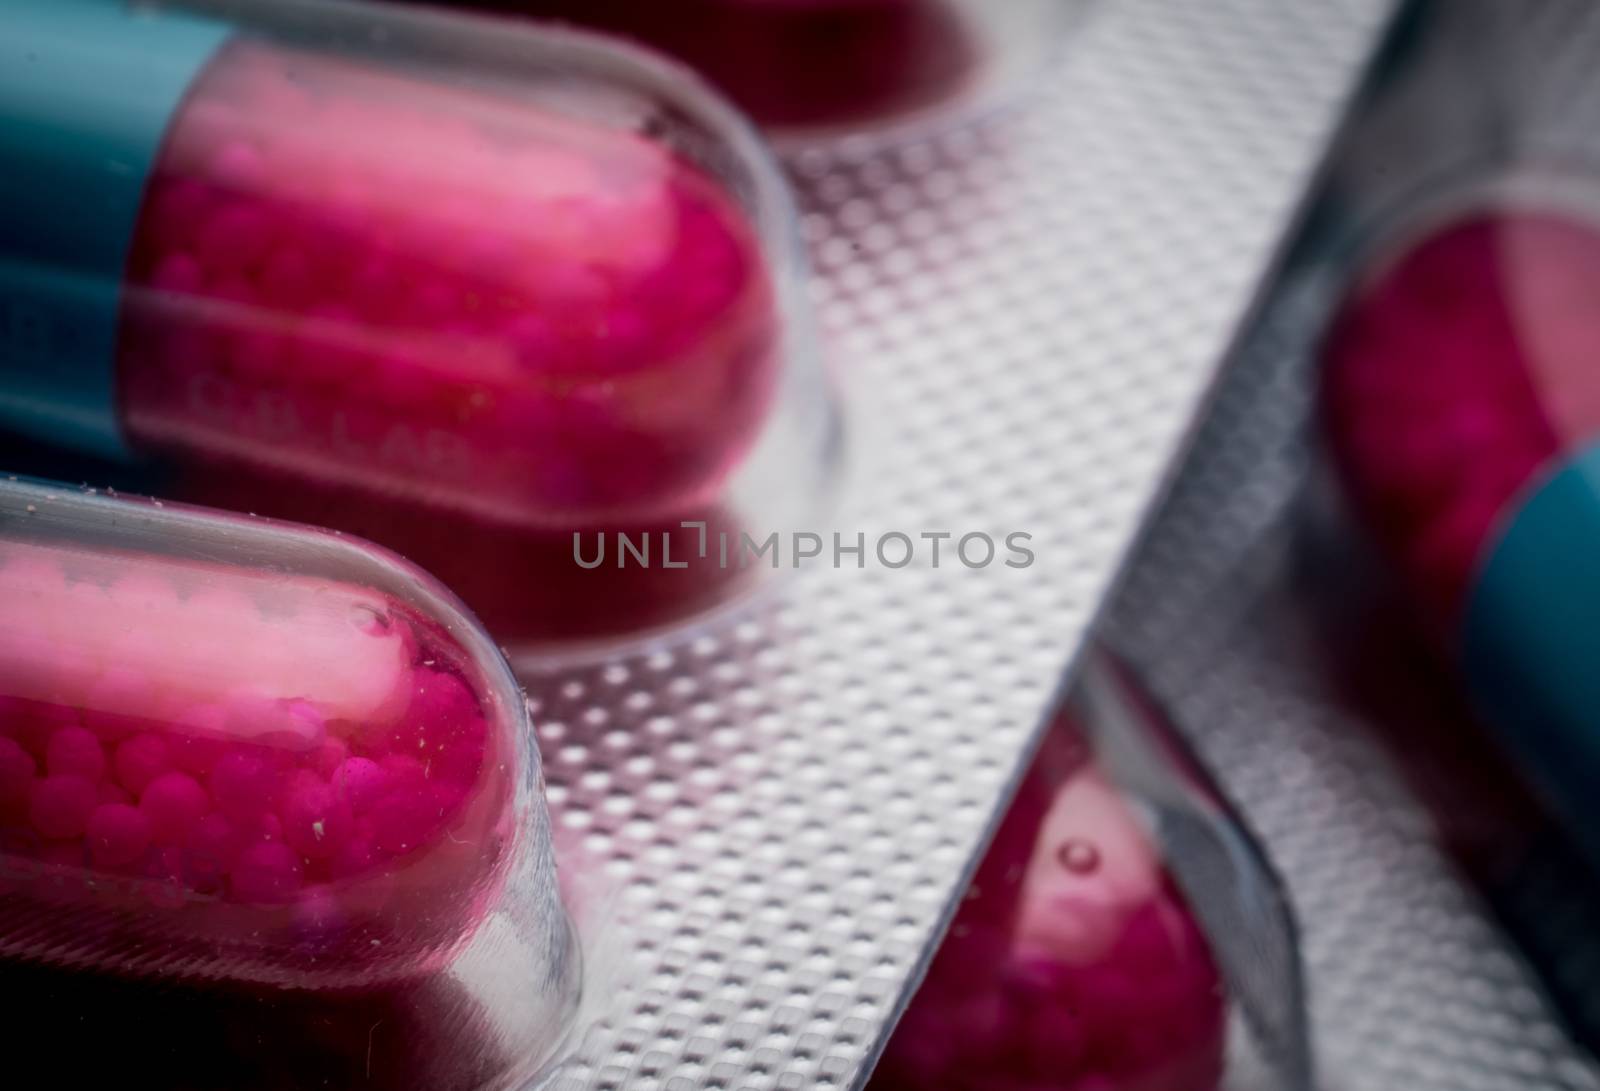 Selective focus of blue, pink capsule with granule in side pills. Pills in blister pack on white background. Pharmaceutical dosage form and packaging. Anti-fungal medicine. Pharmaceutical industry. Pharmacy background. Global healthcare concept.